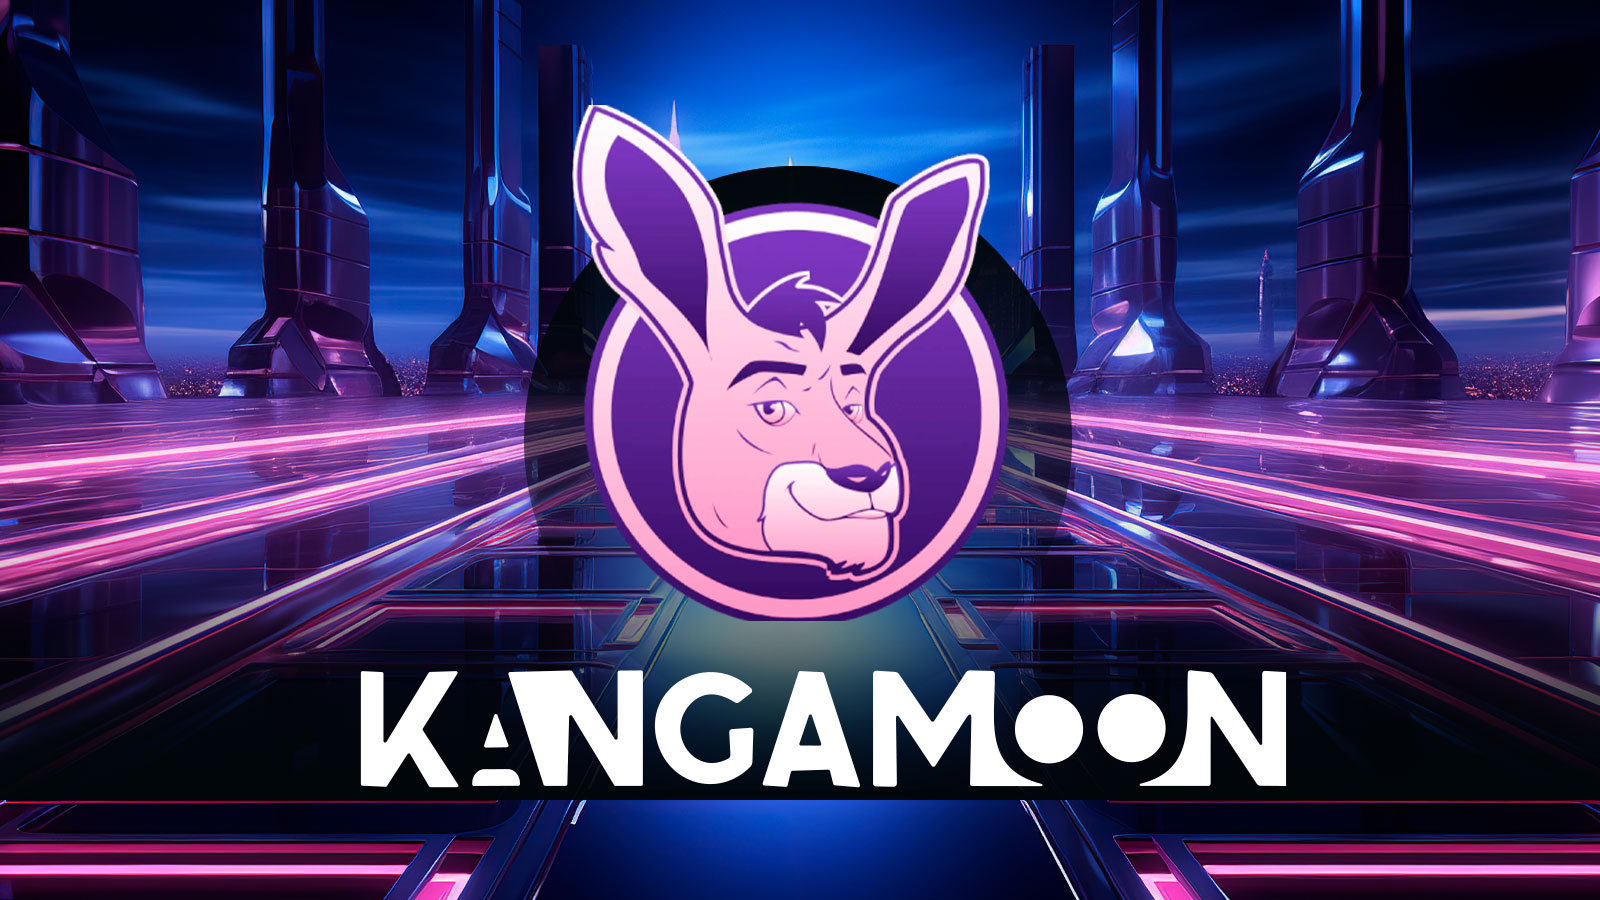 KangaMoon Is Entering Memecoin Stage, Dogecoin Remain Stable